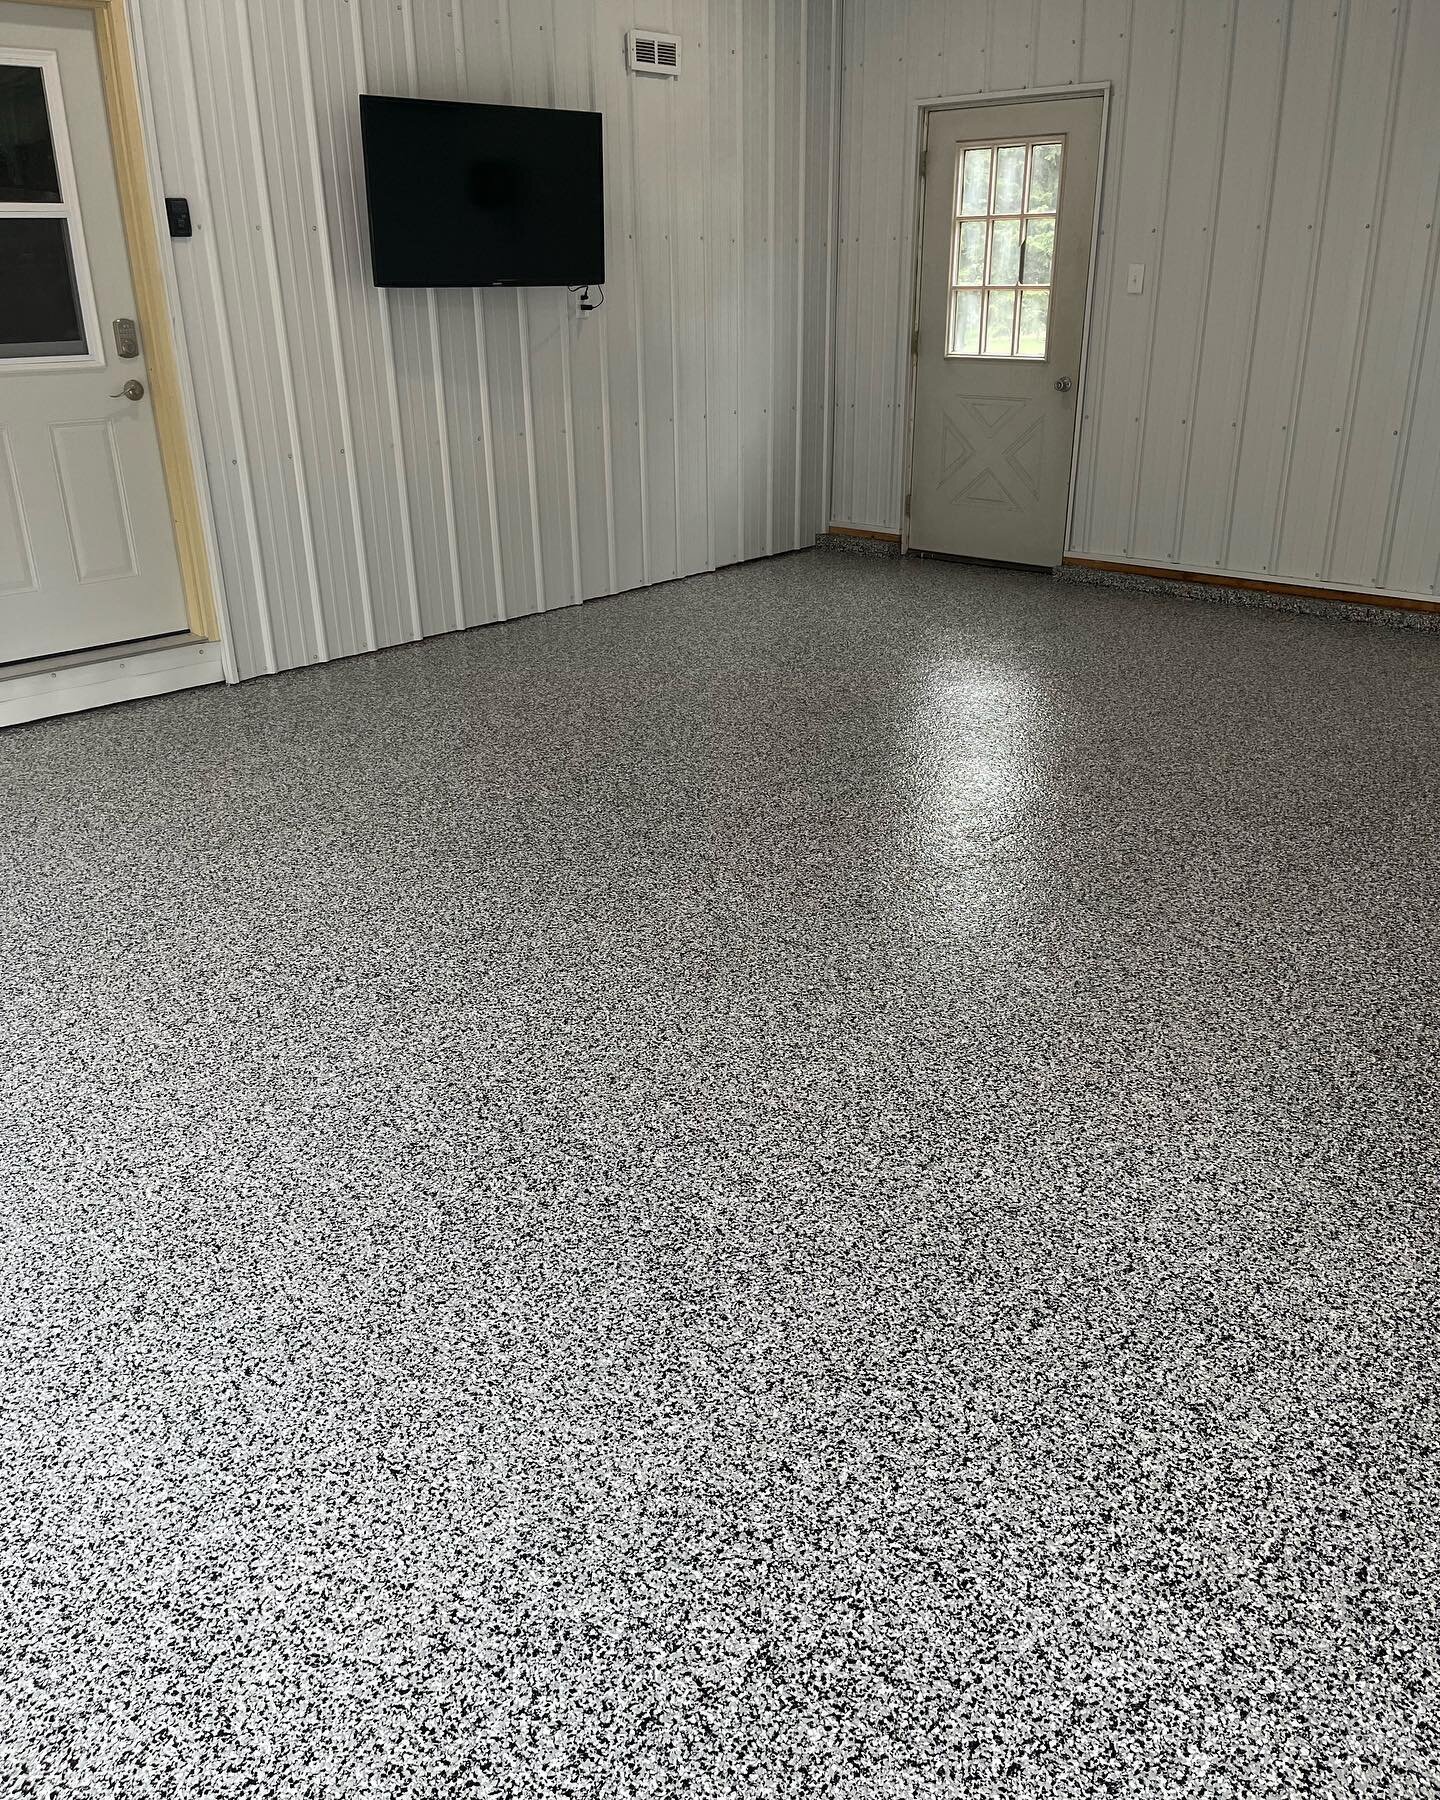 &ldquo;Domino&rdquo; color always is a crowd pleaser! We installed this #epoxyfloor to dress up the area and to have years of easy cleaning! Call today for your free quote! 📞 605-524-2180